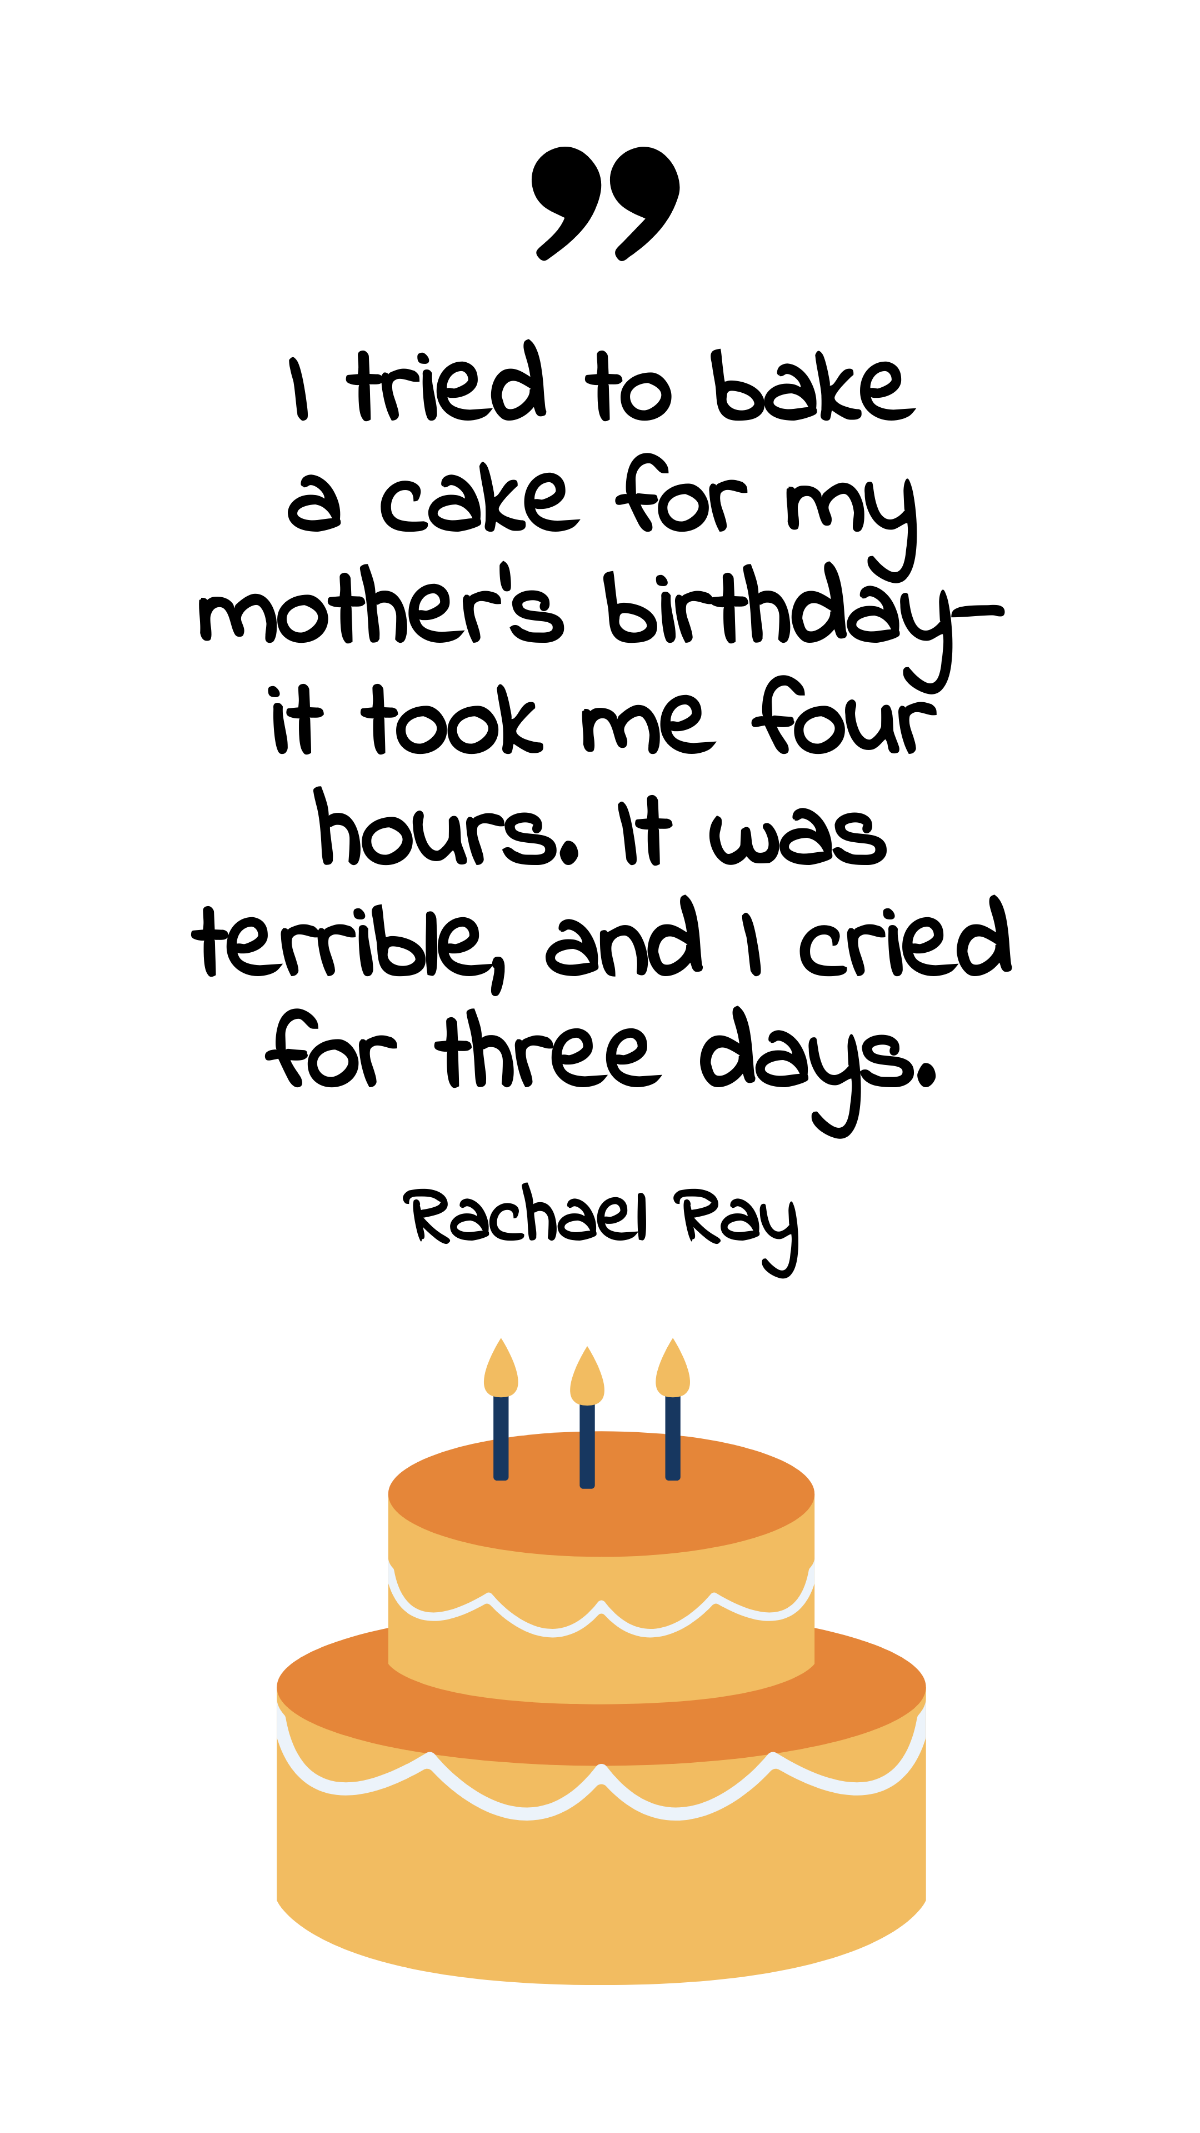 Rachael Ray - I tried to bake a cake for my mother's birthday - it took me four hours. It was terrible, and I cried for three days. Template